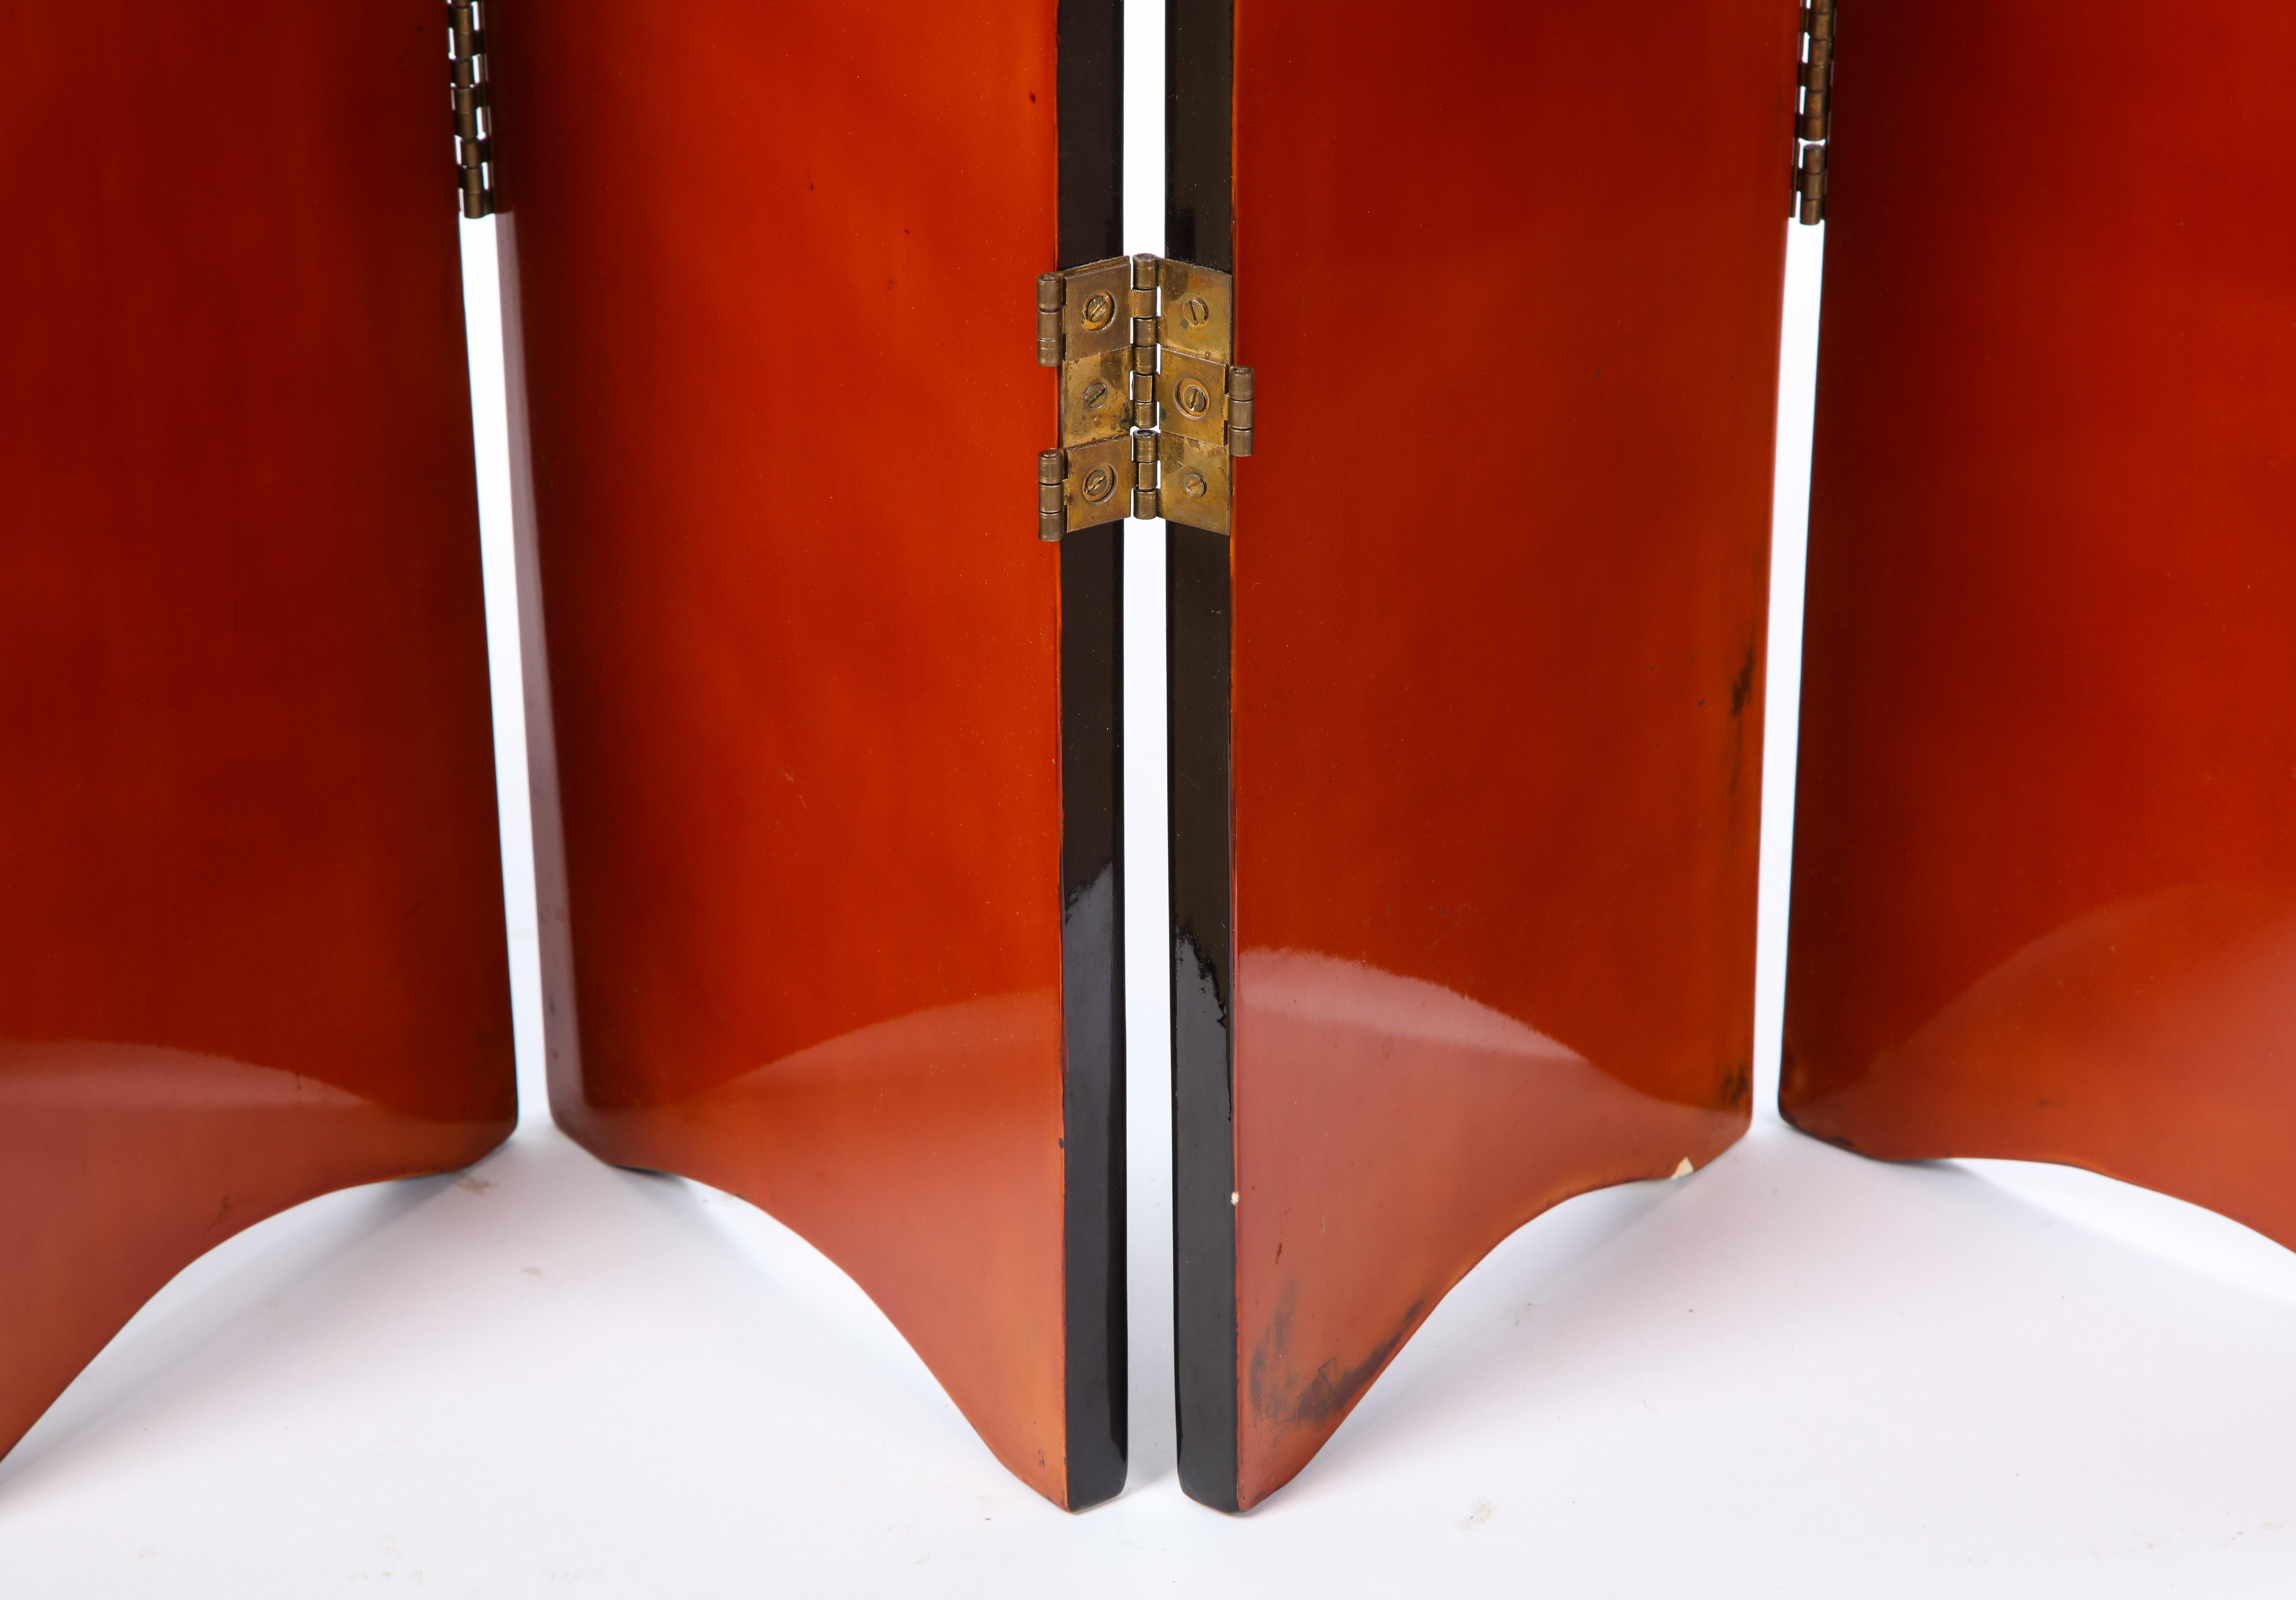 20th Century Six-Panel Lacquer Screen in Orange and Black, Modern